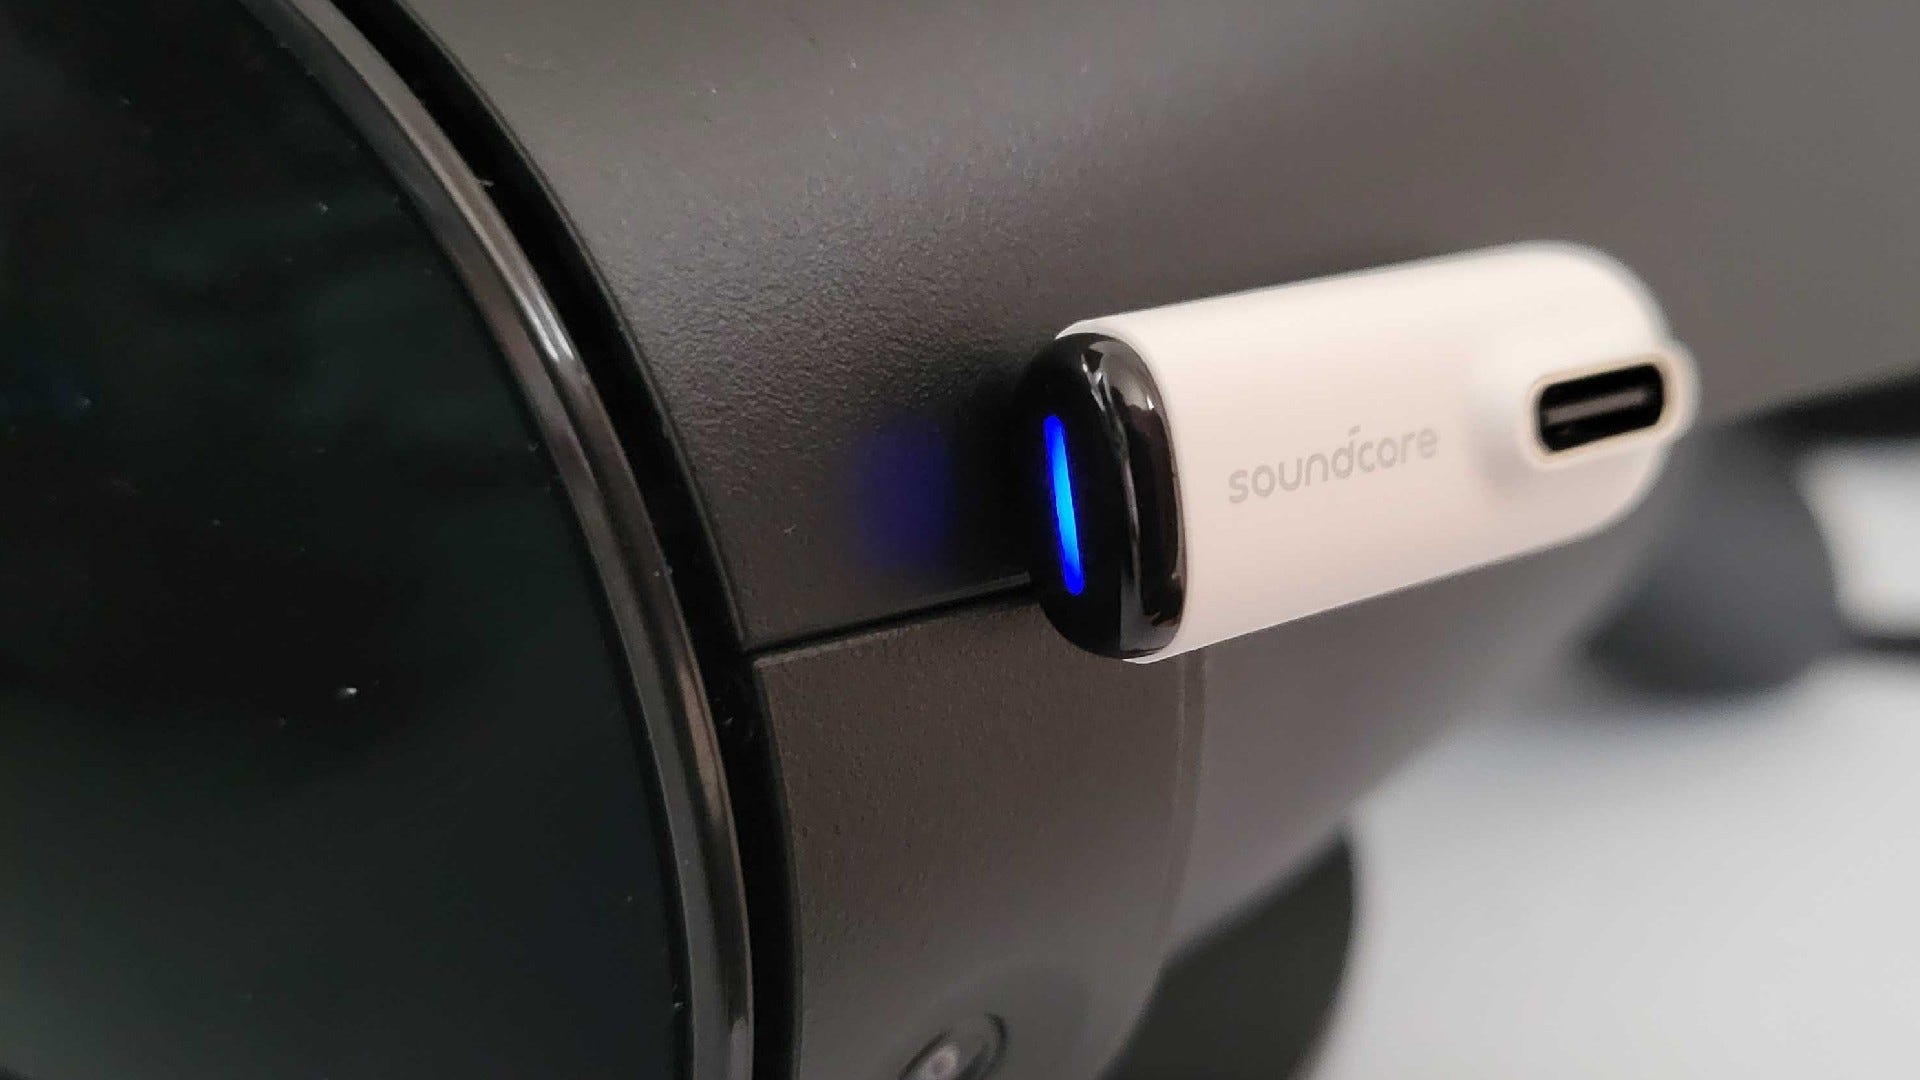 Soundcore Dongle plugged into the Quest Pro